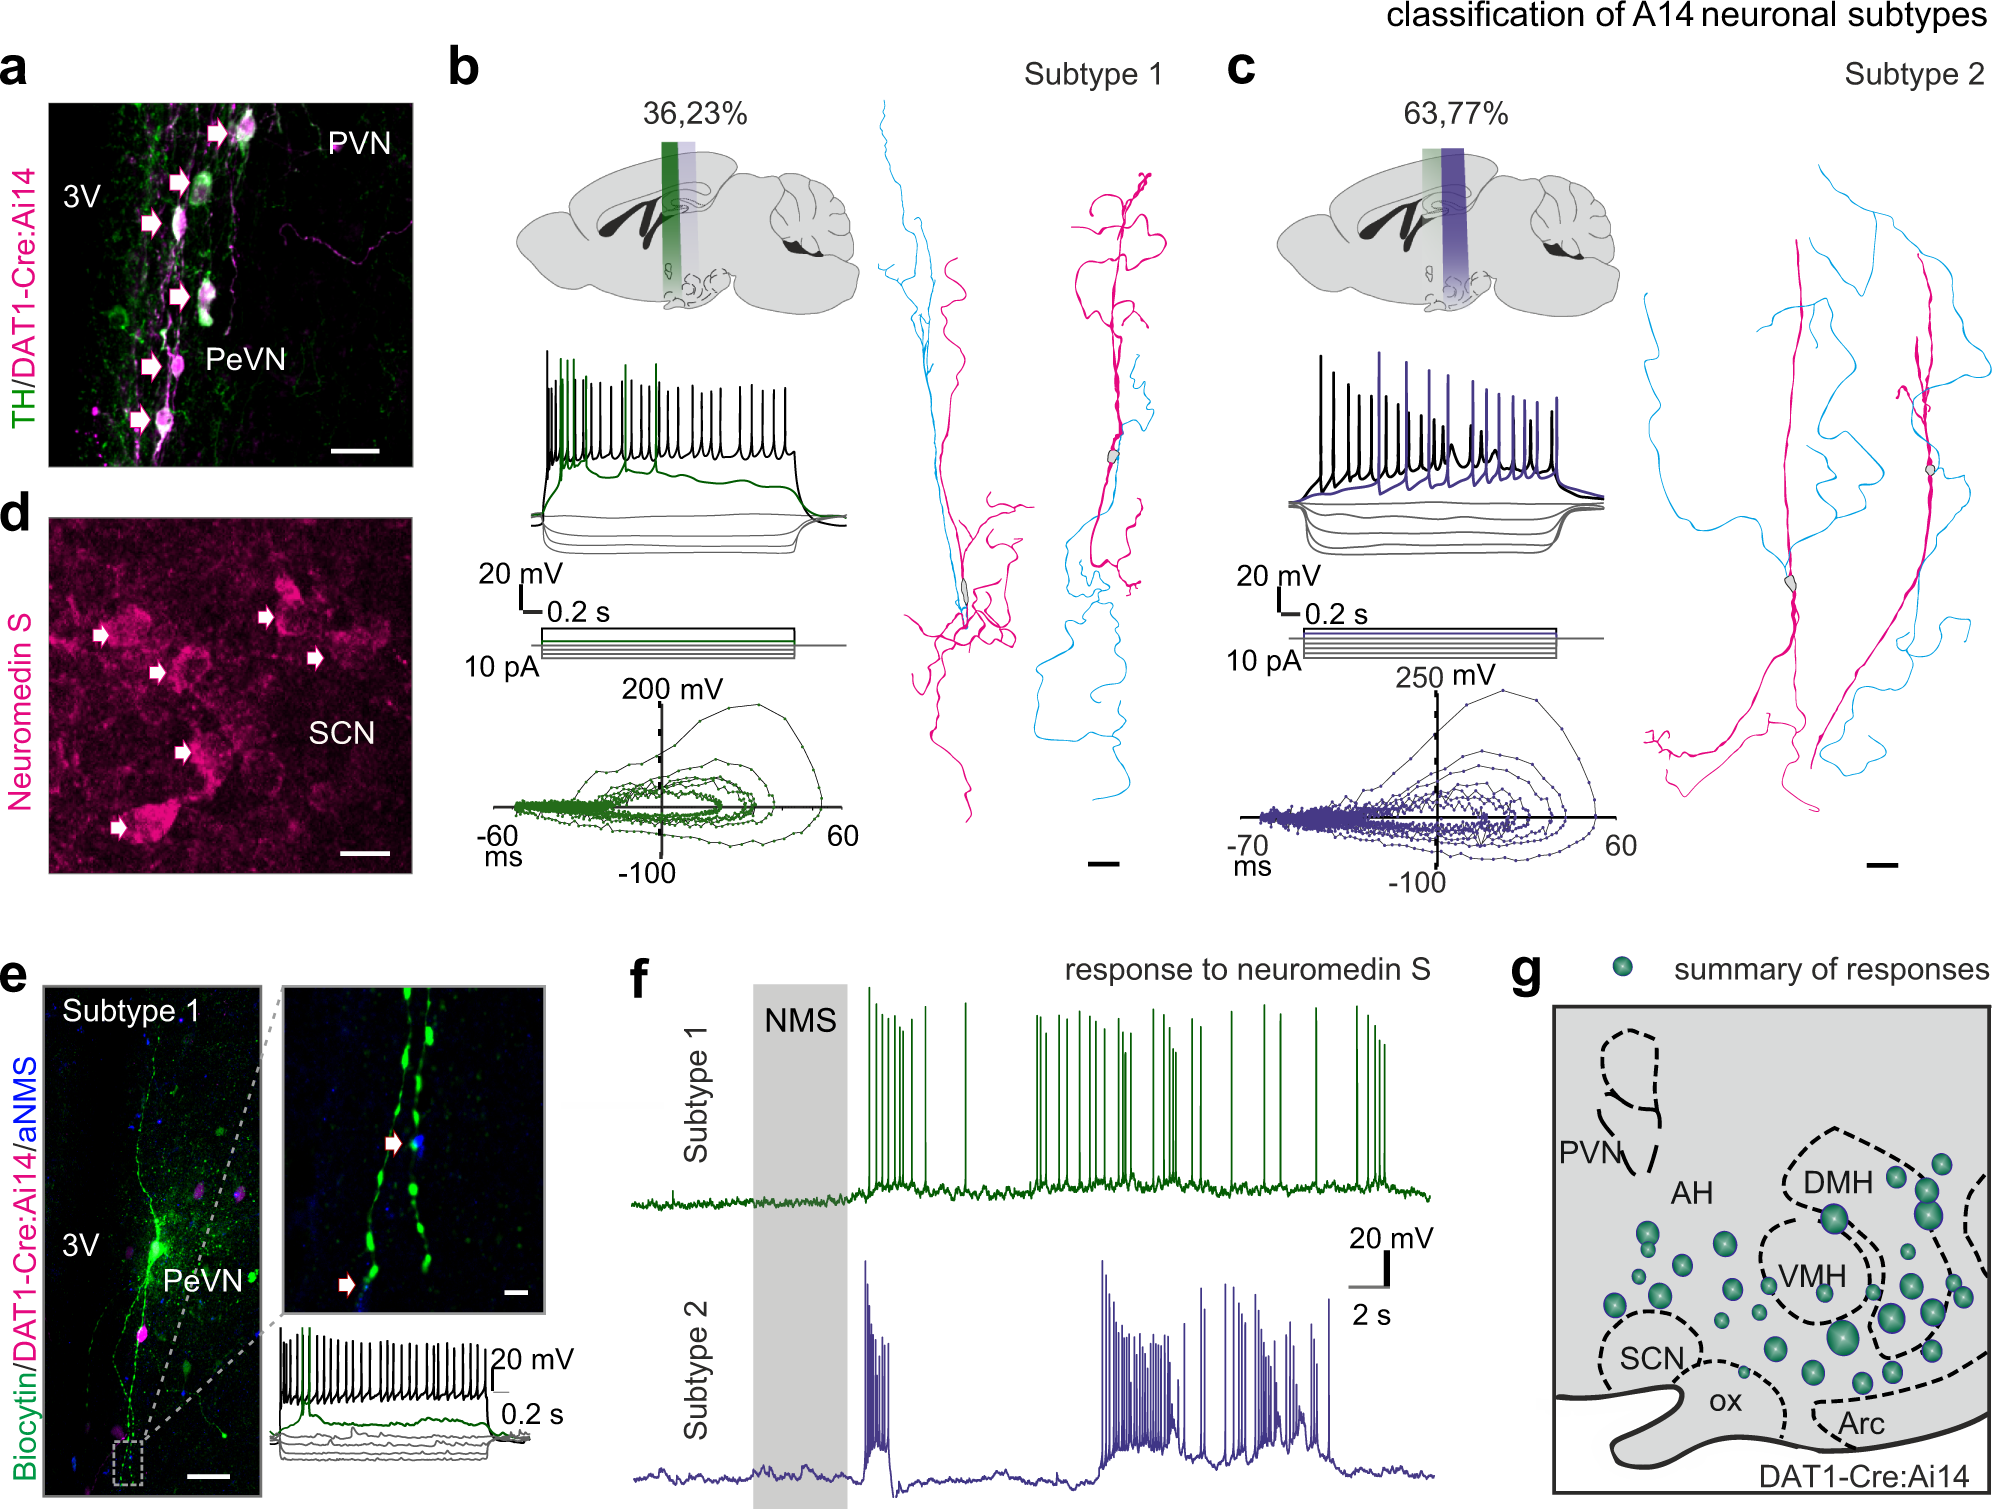 A hypothalamic dopamine locus for psychostimulant-induced hyperlocomotion  in mice | Nature Communications